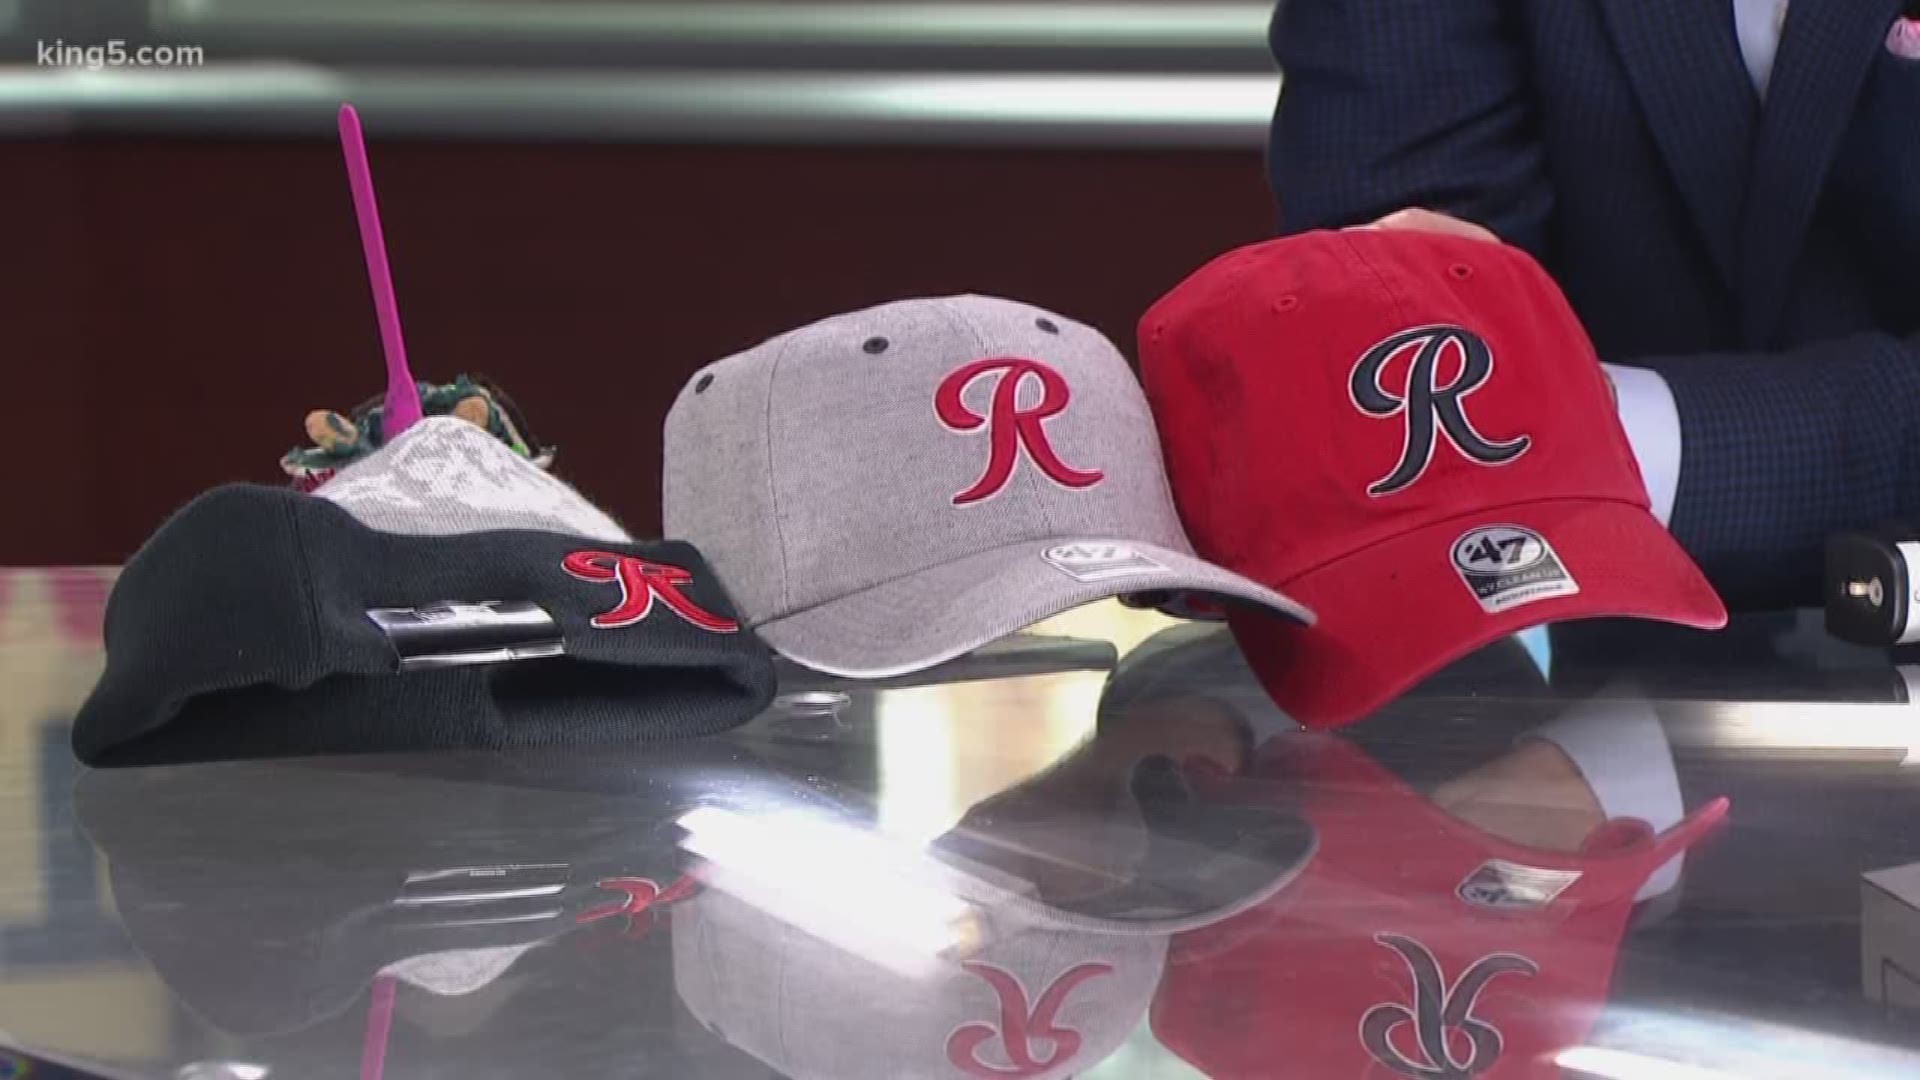 AJ Garcia from the Tacoma Rainiers talks about their "R Hat R City" fundraising push benefitting such causes as solar panels for Jason Lee Middle School.